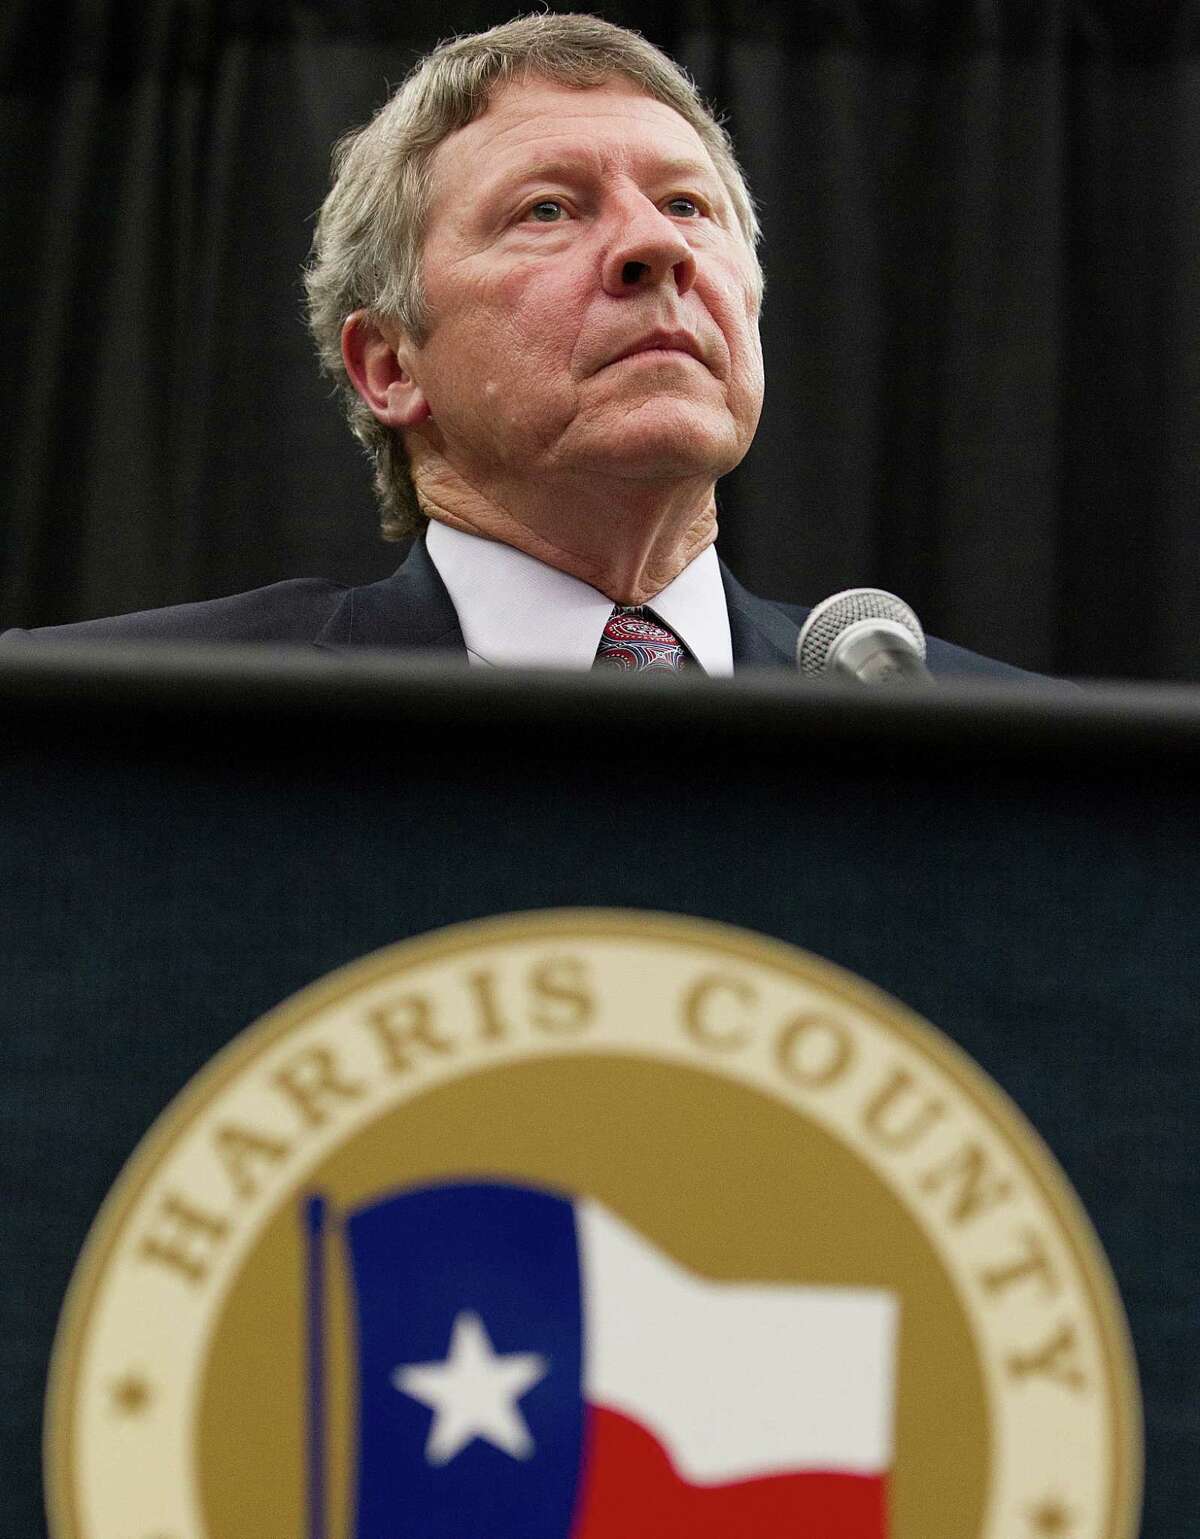 Harris County Judge Ed Emmett has picked a candidate to replace late Precinct 1 Commissioner El Franco Lee. He said he will announce the appointment on Friday.